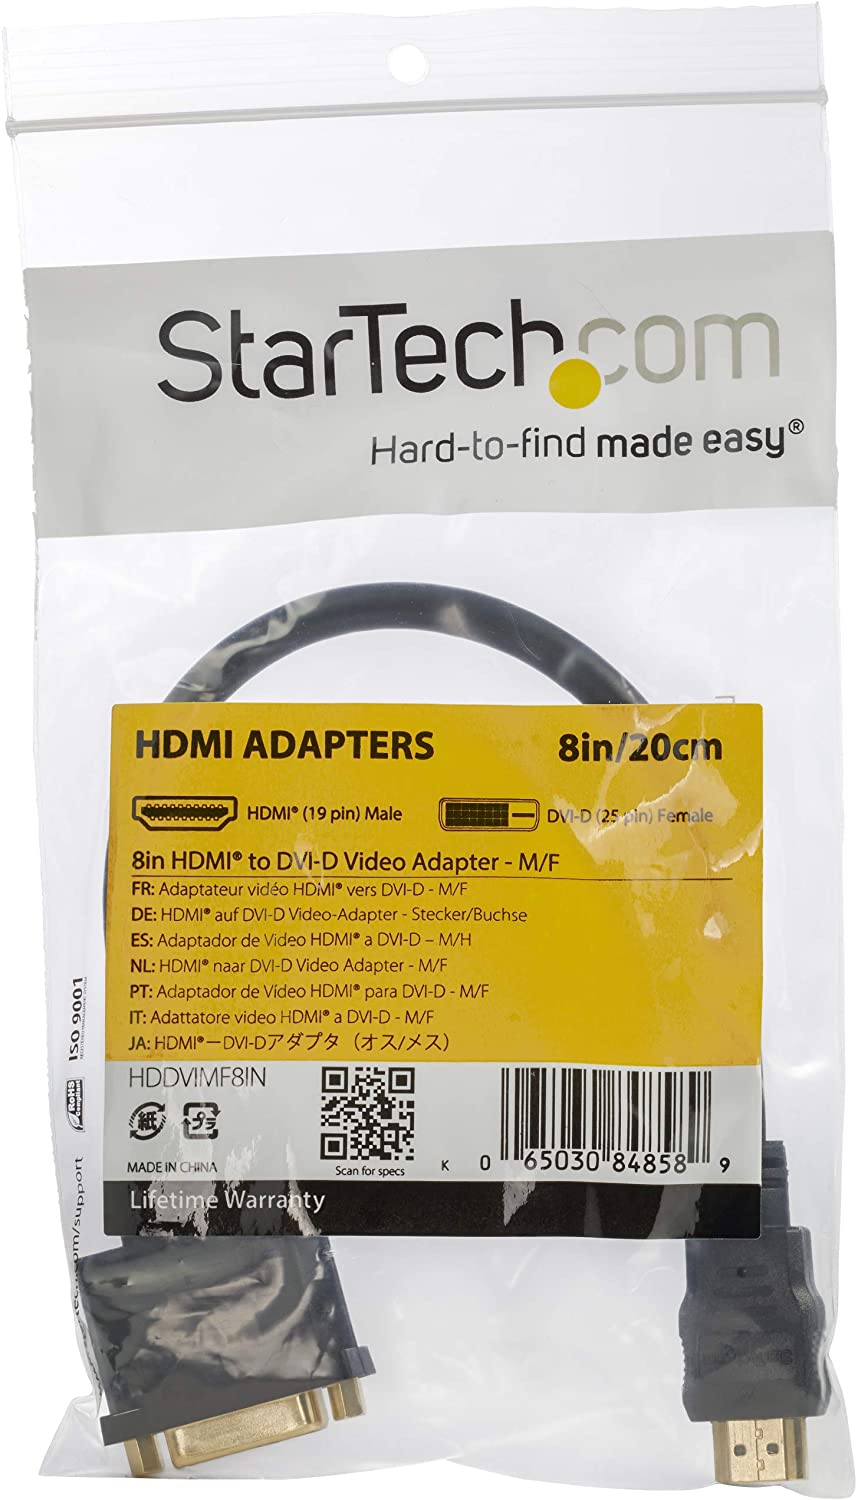 StarTech.com HDMI Male to DVI Female Adapter - 8in - 1080p DVI-D Gender Changer Cable (HDDVIMF8IN) HDMI (M) to DVI (F) Standard Packaging